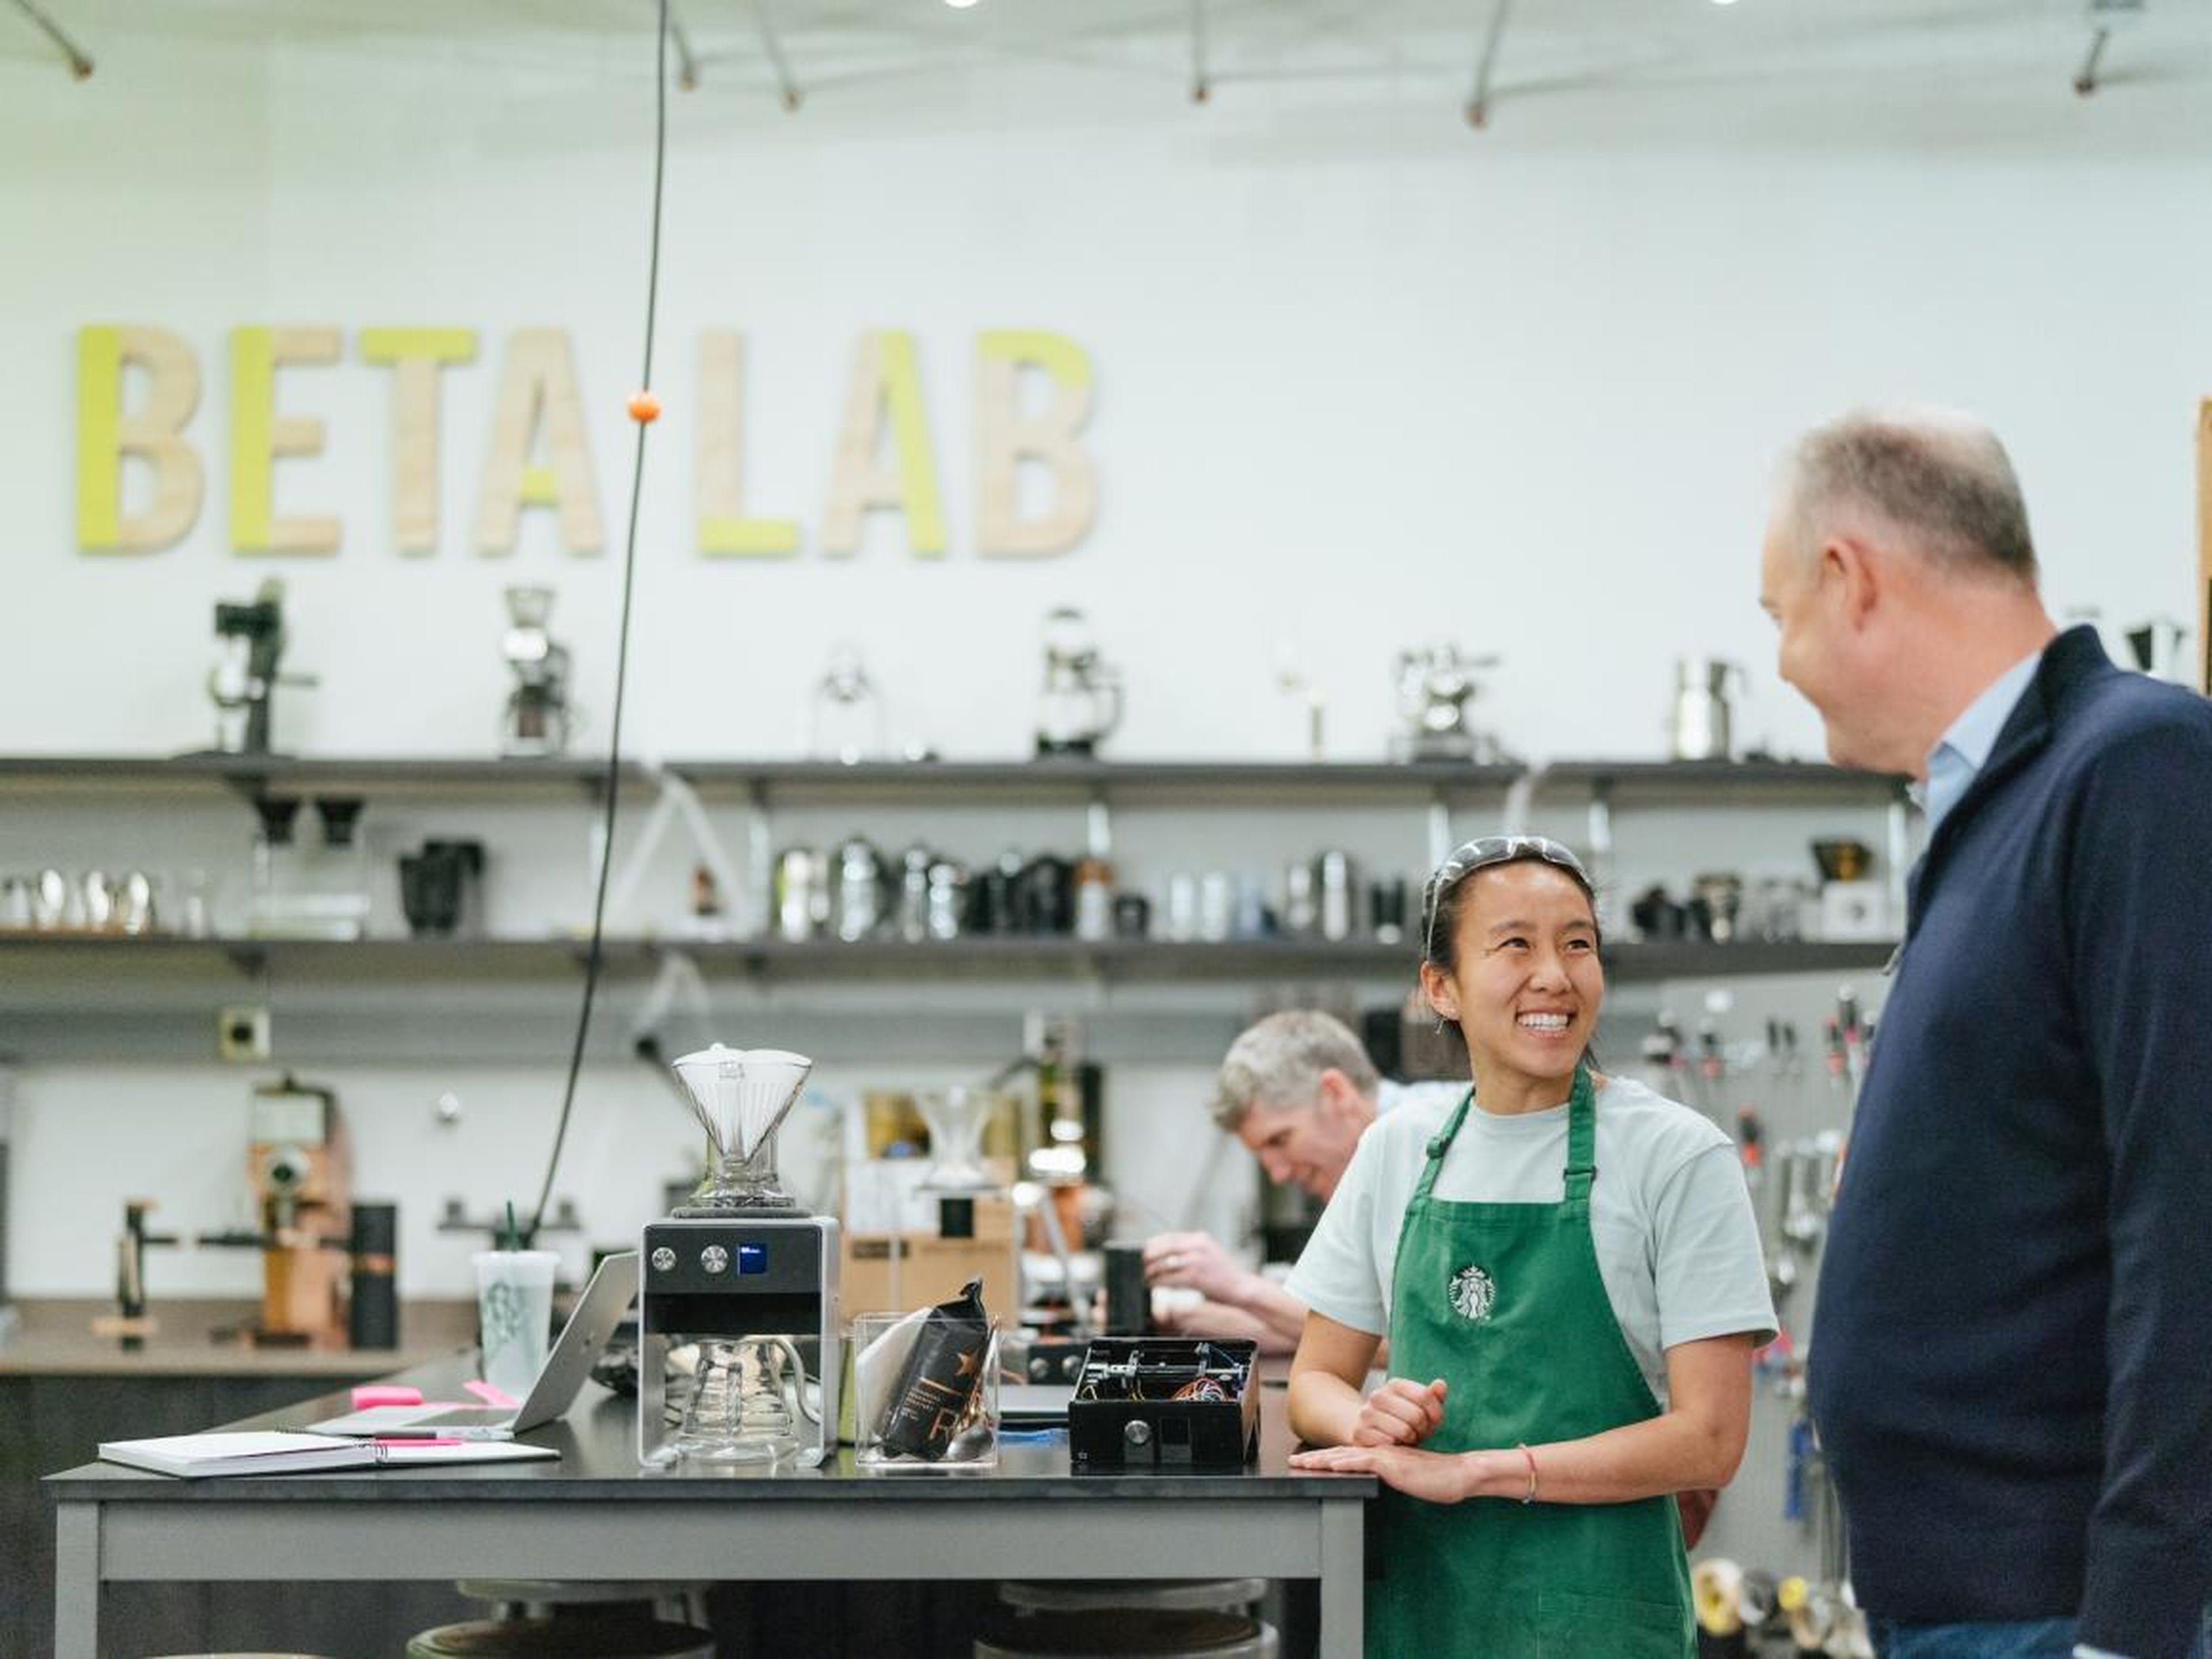 The Tryer Center is just one way Starbucks is pushing for new types of innovation faster than ever before. Earlier this year, the company announced a $100 million investment in Valor Siren Ventures, a new fund focused on food and